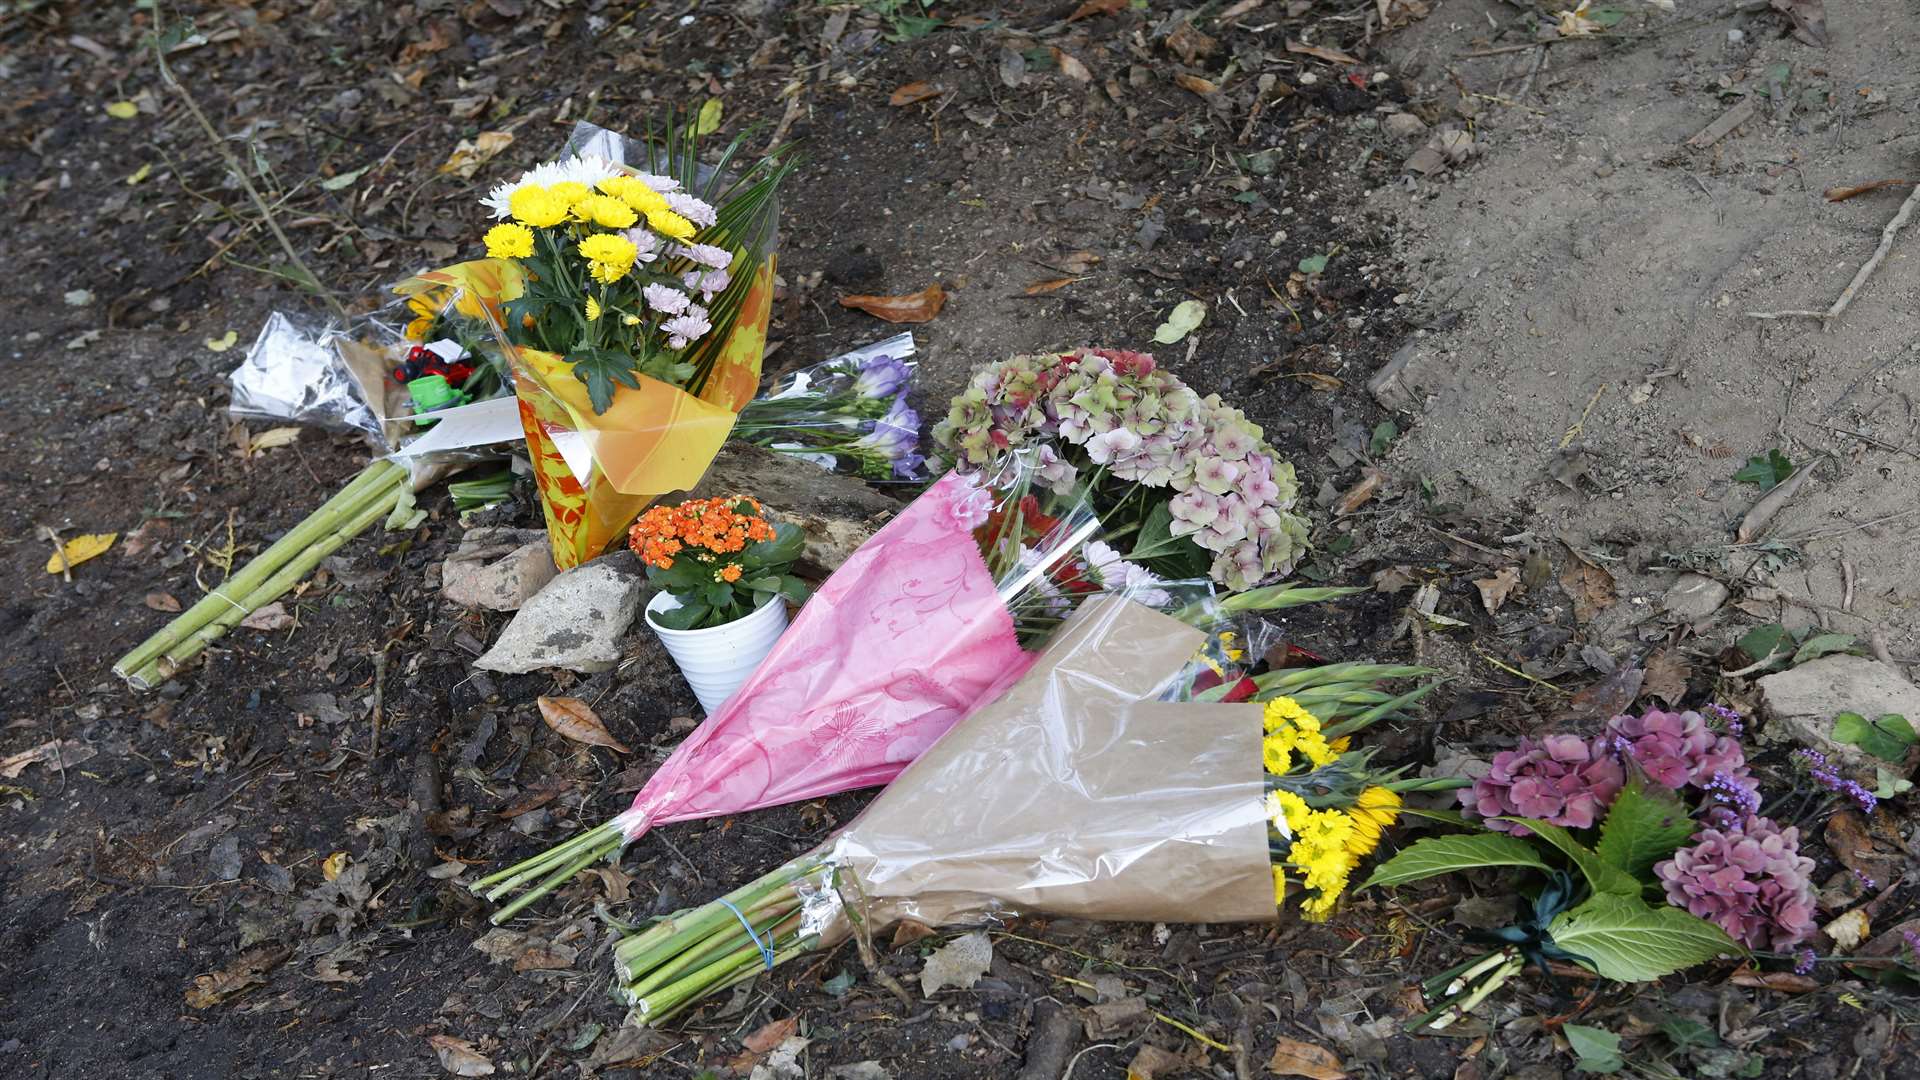 Floral tributes at the scene. Picture: Andy Jones